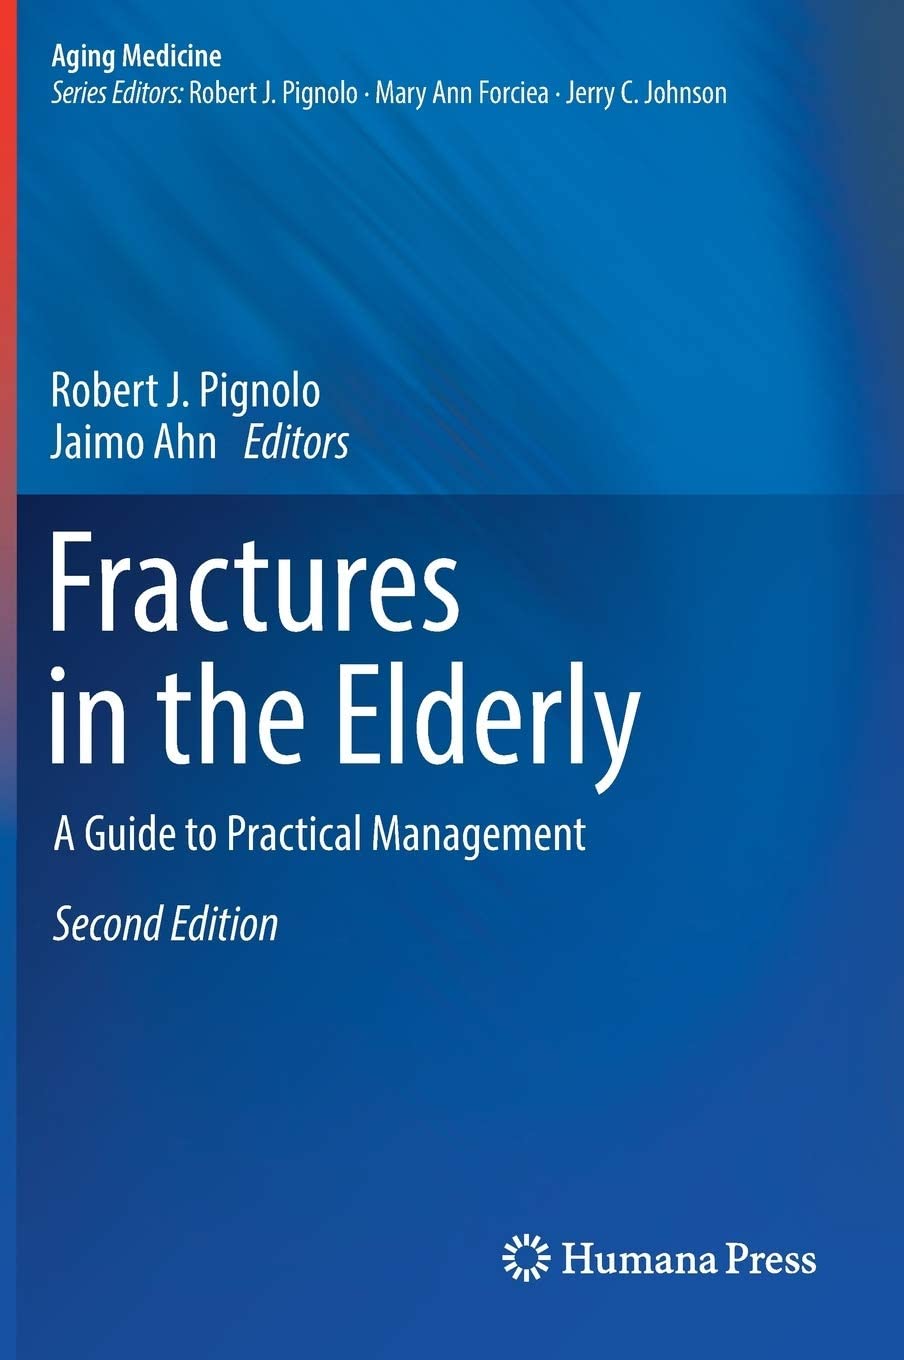 Fractures in the elderly : a guide to practical management